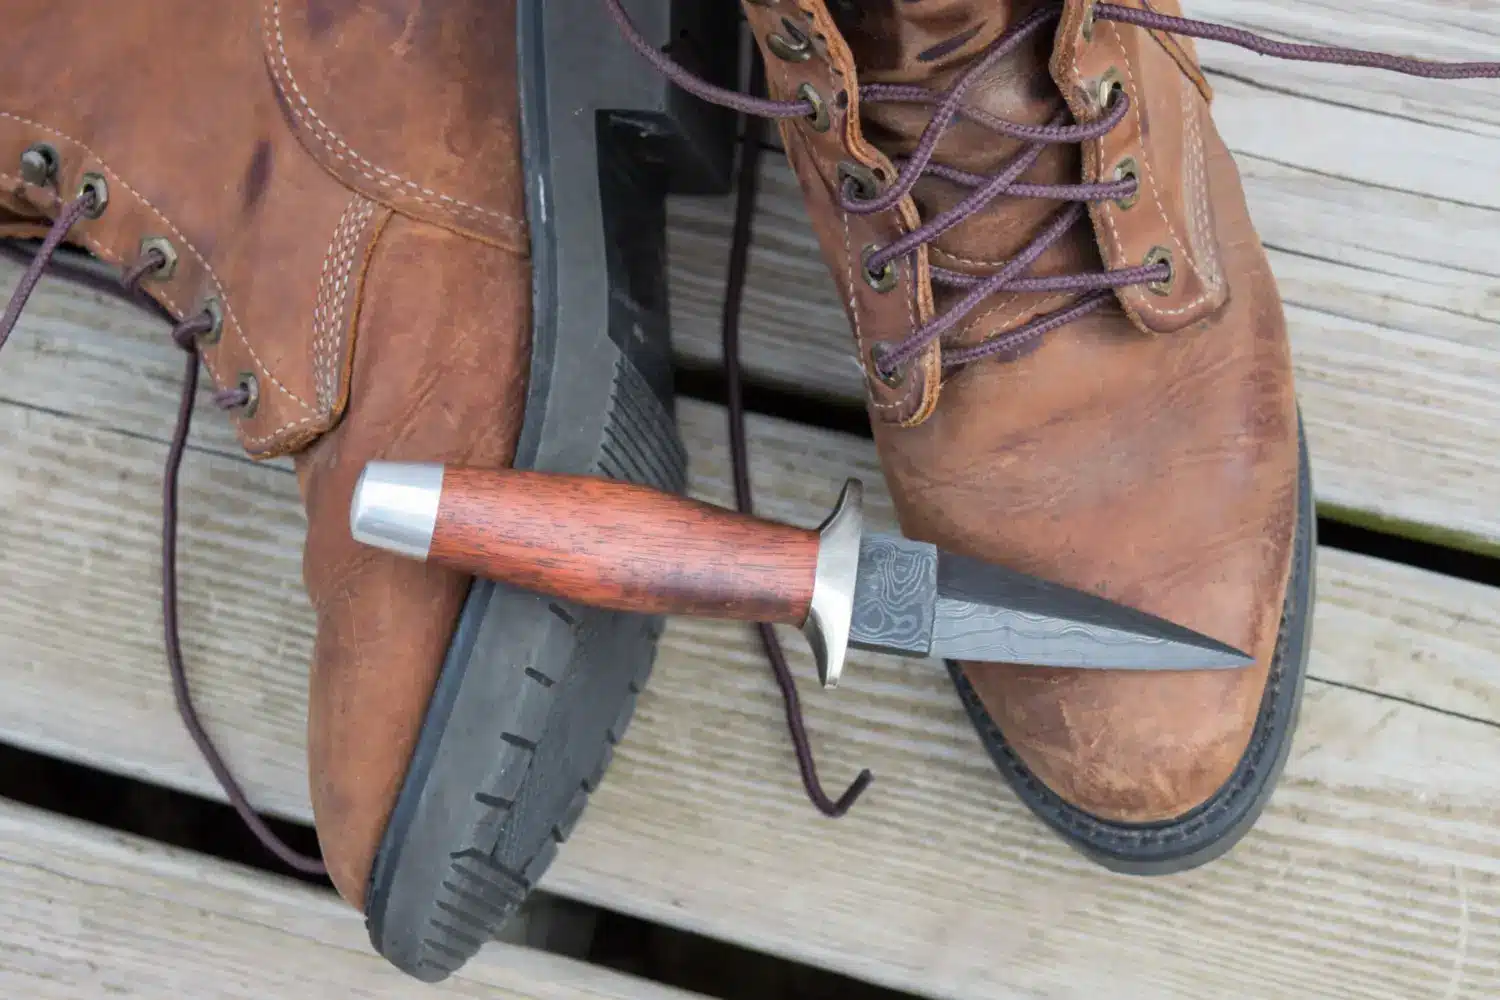 knife sitting on boots